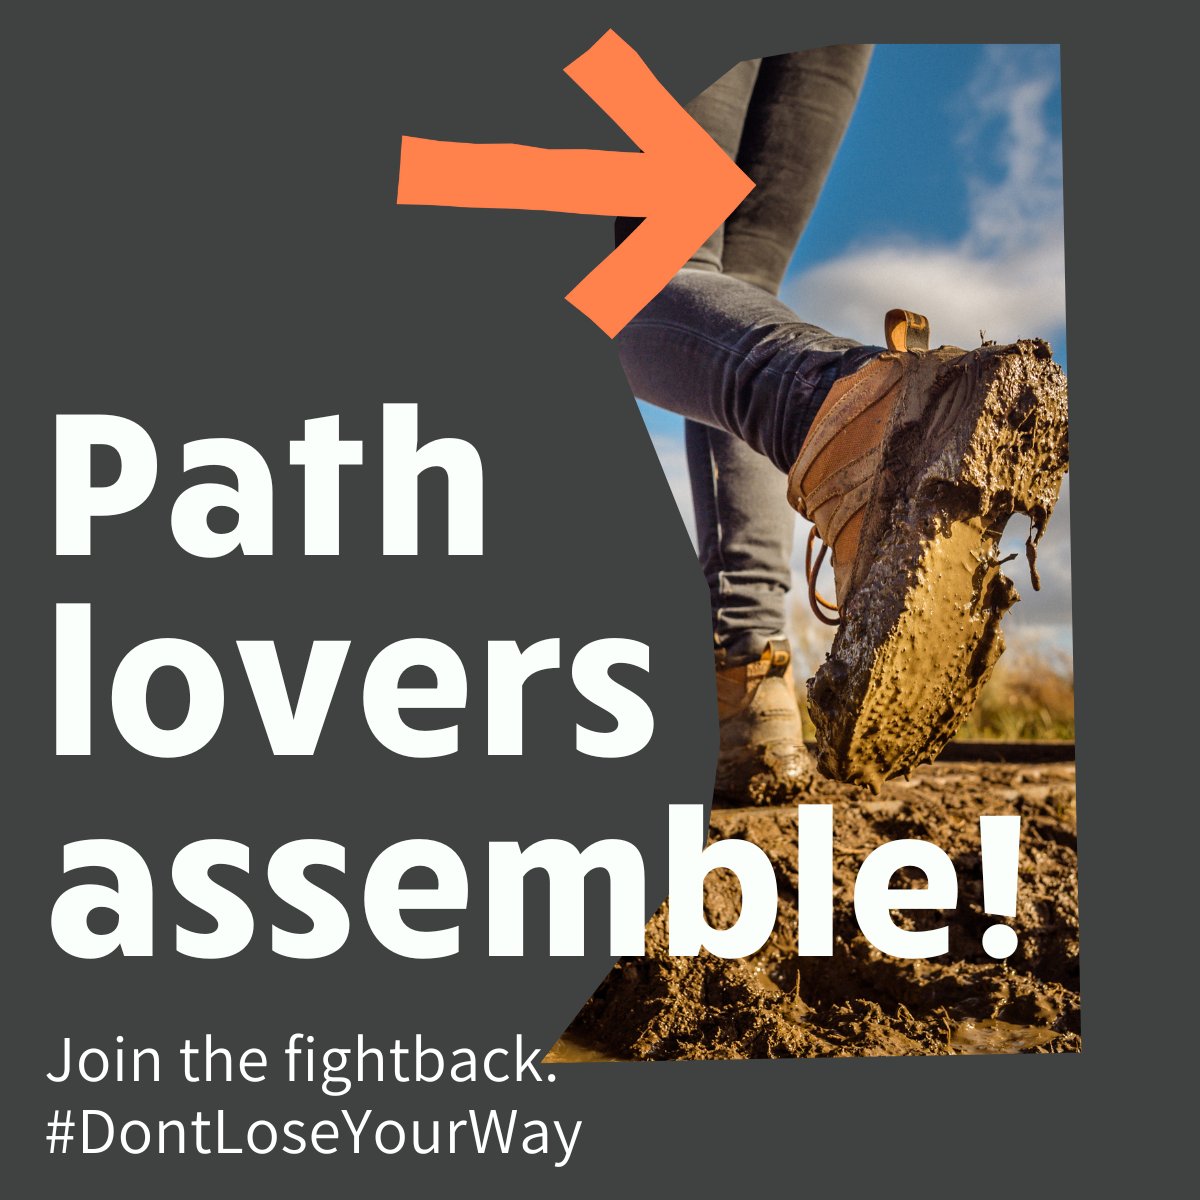 Our walking rights didn’t happen by accident...

These paths were shaped by our ancestors over centuries 🥾 & our rights to walk them fought for by ramblers past 

We can't sit back & let them be eroded. Not on our watch.

Join the fightback ✊ #Volunteer

dontloseyourway.ramblers.org.uk